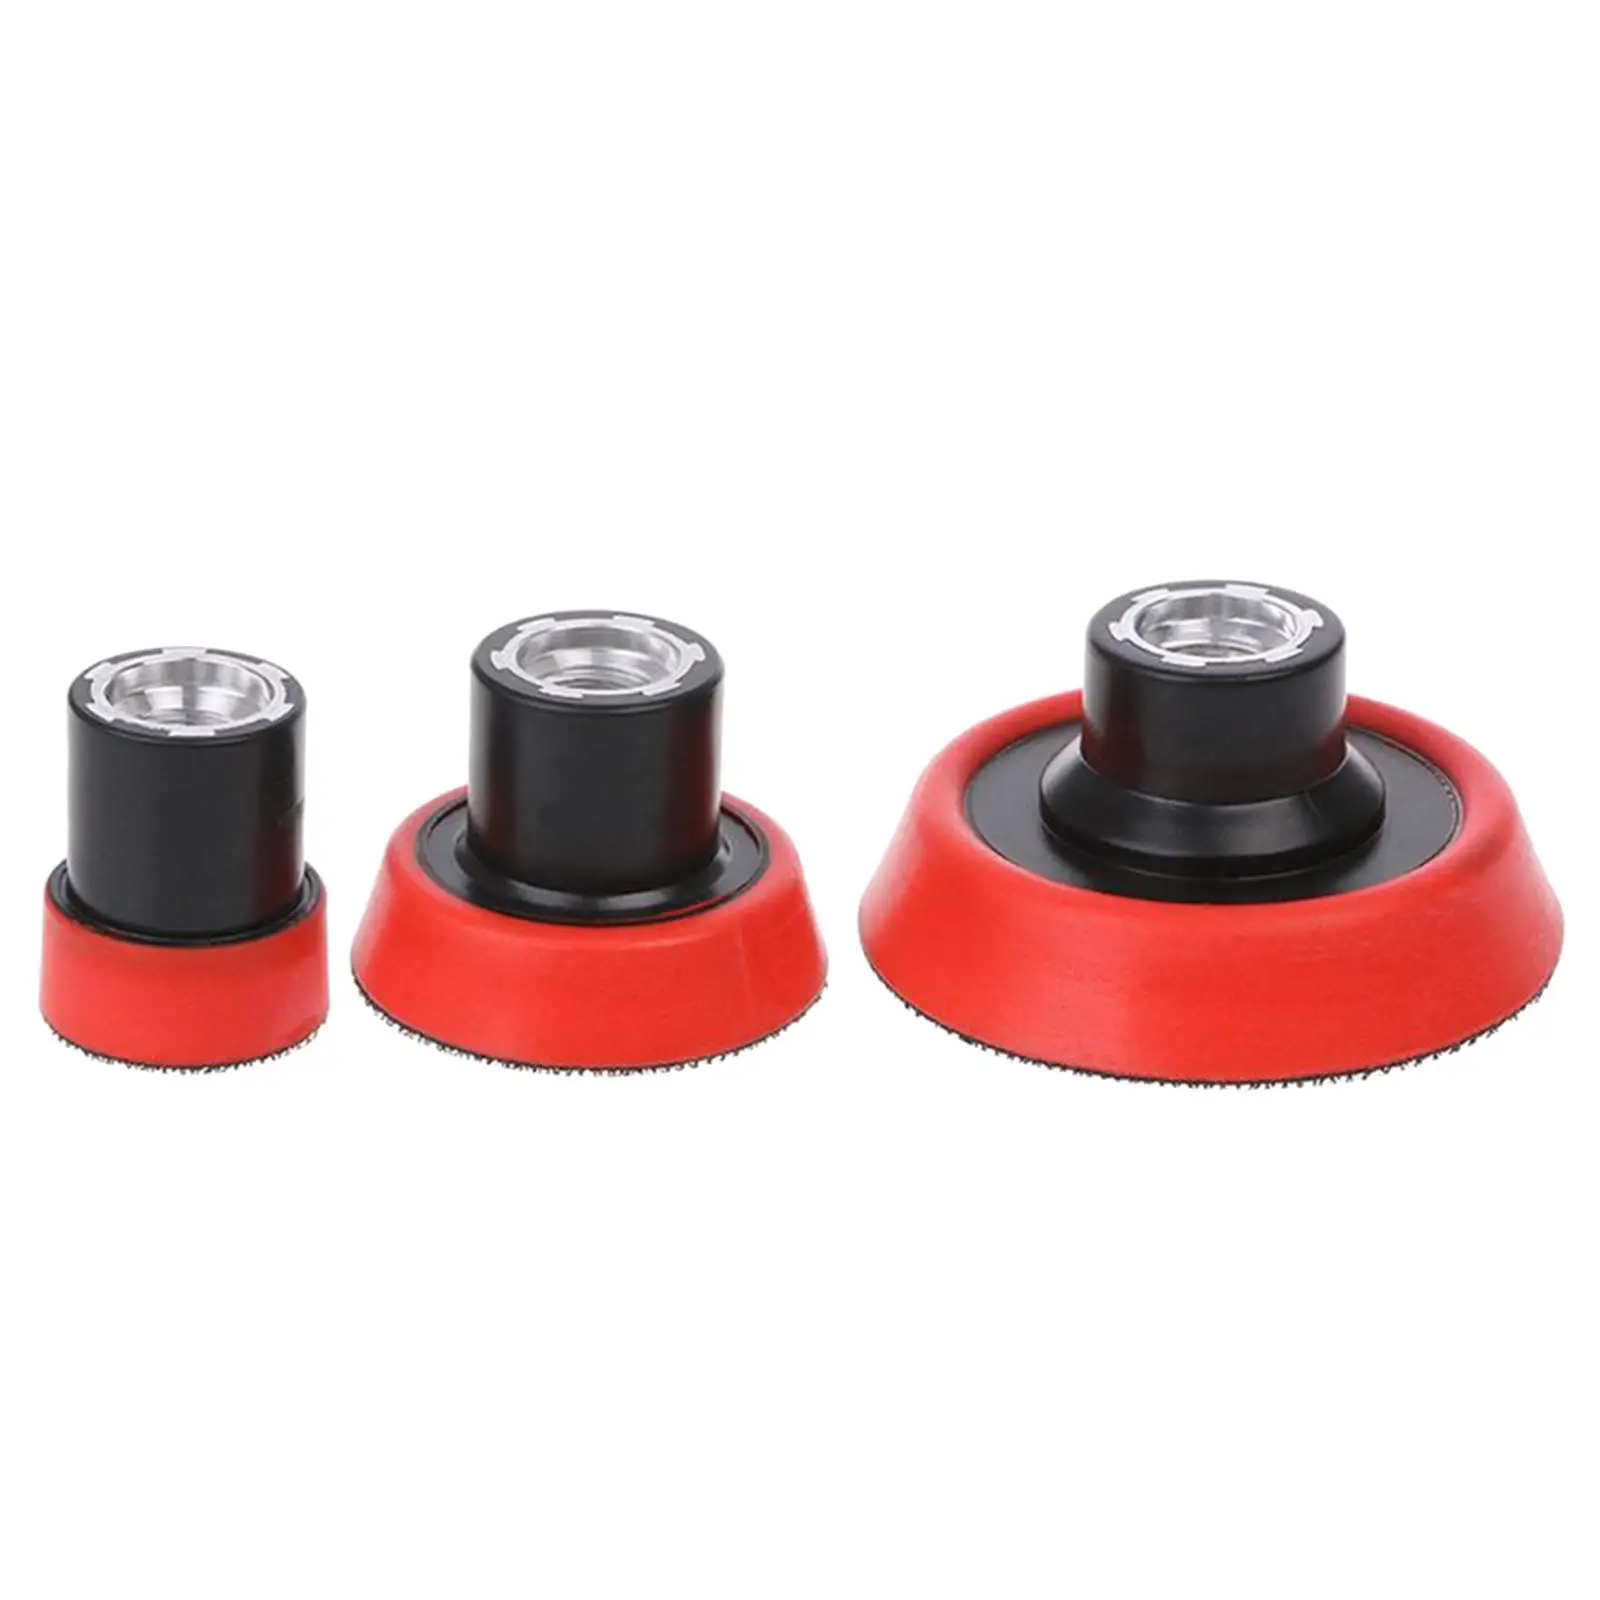 3 Pieces Backing   Backer Durable M14 Polisher for Polishing Car Care